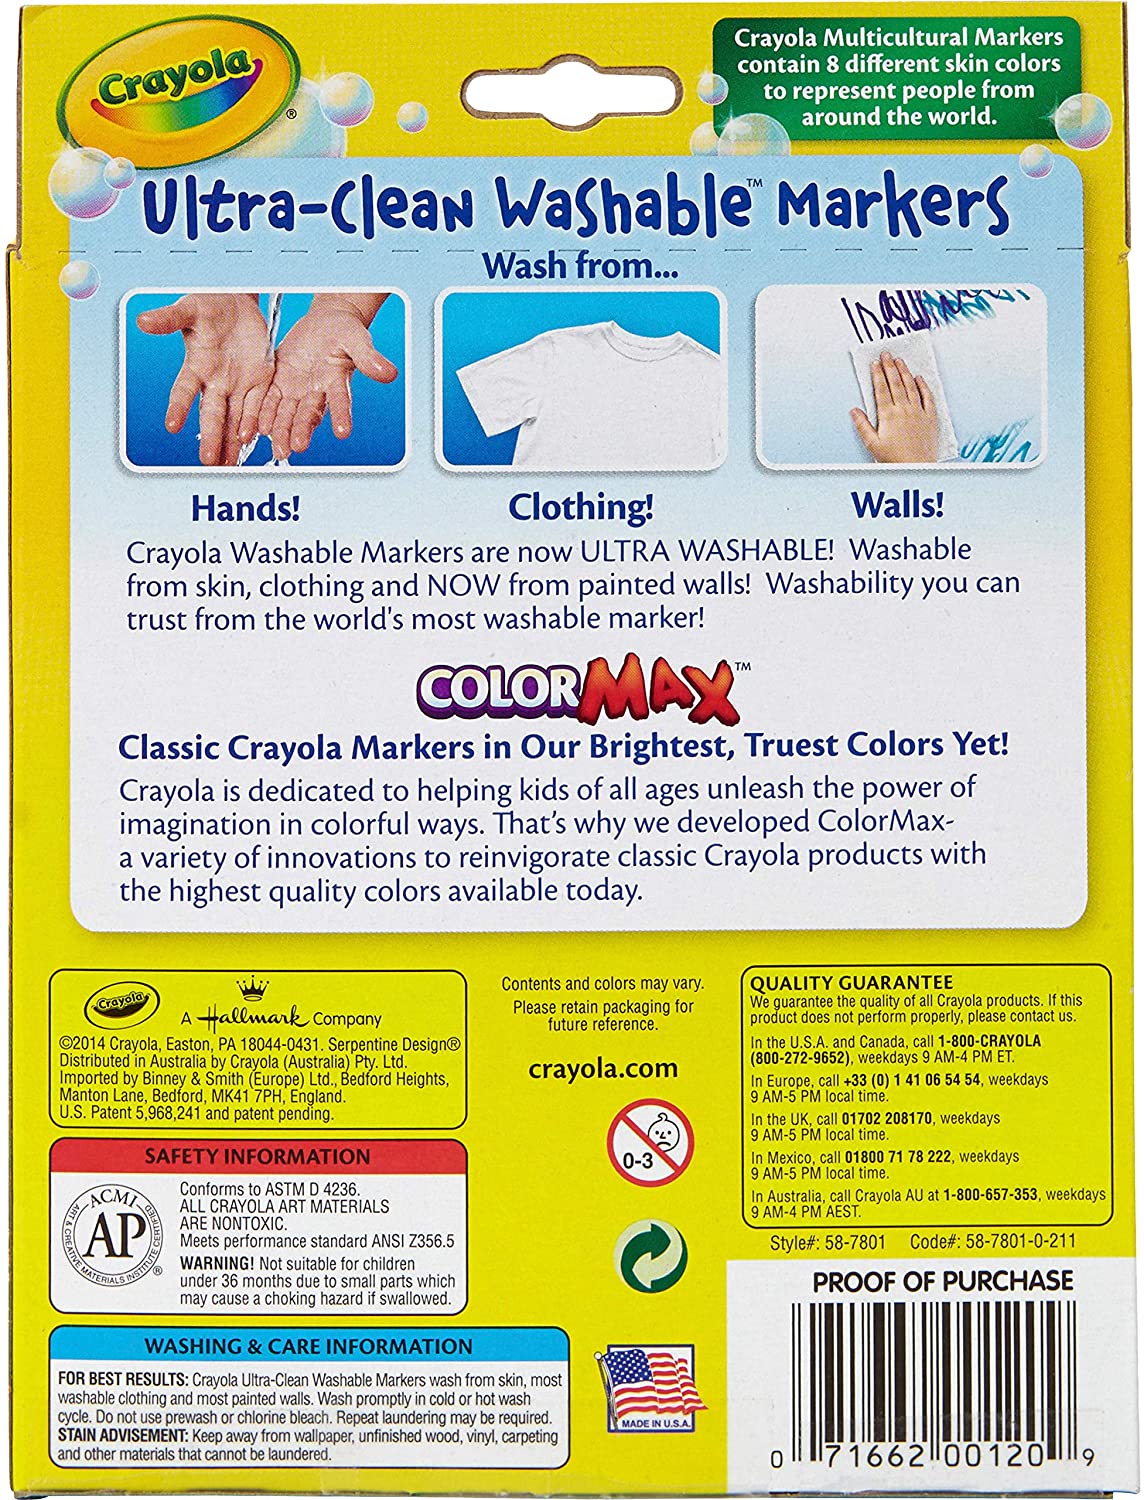 Crayola Ultra-Clean Washable Multicultural Markers